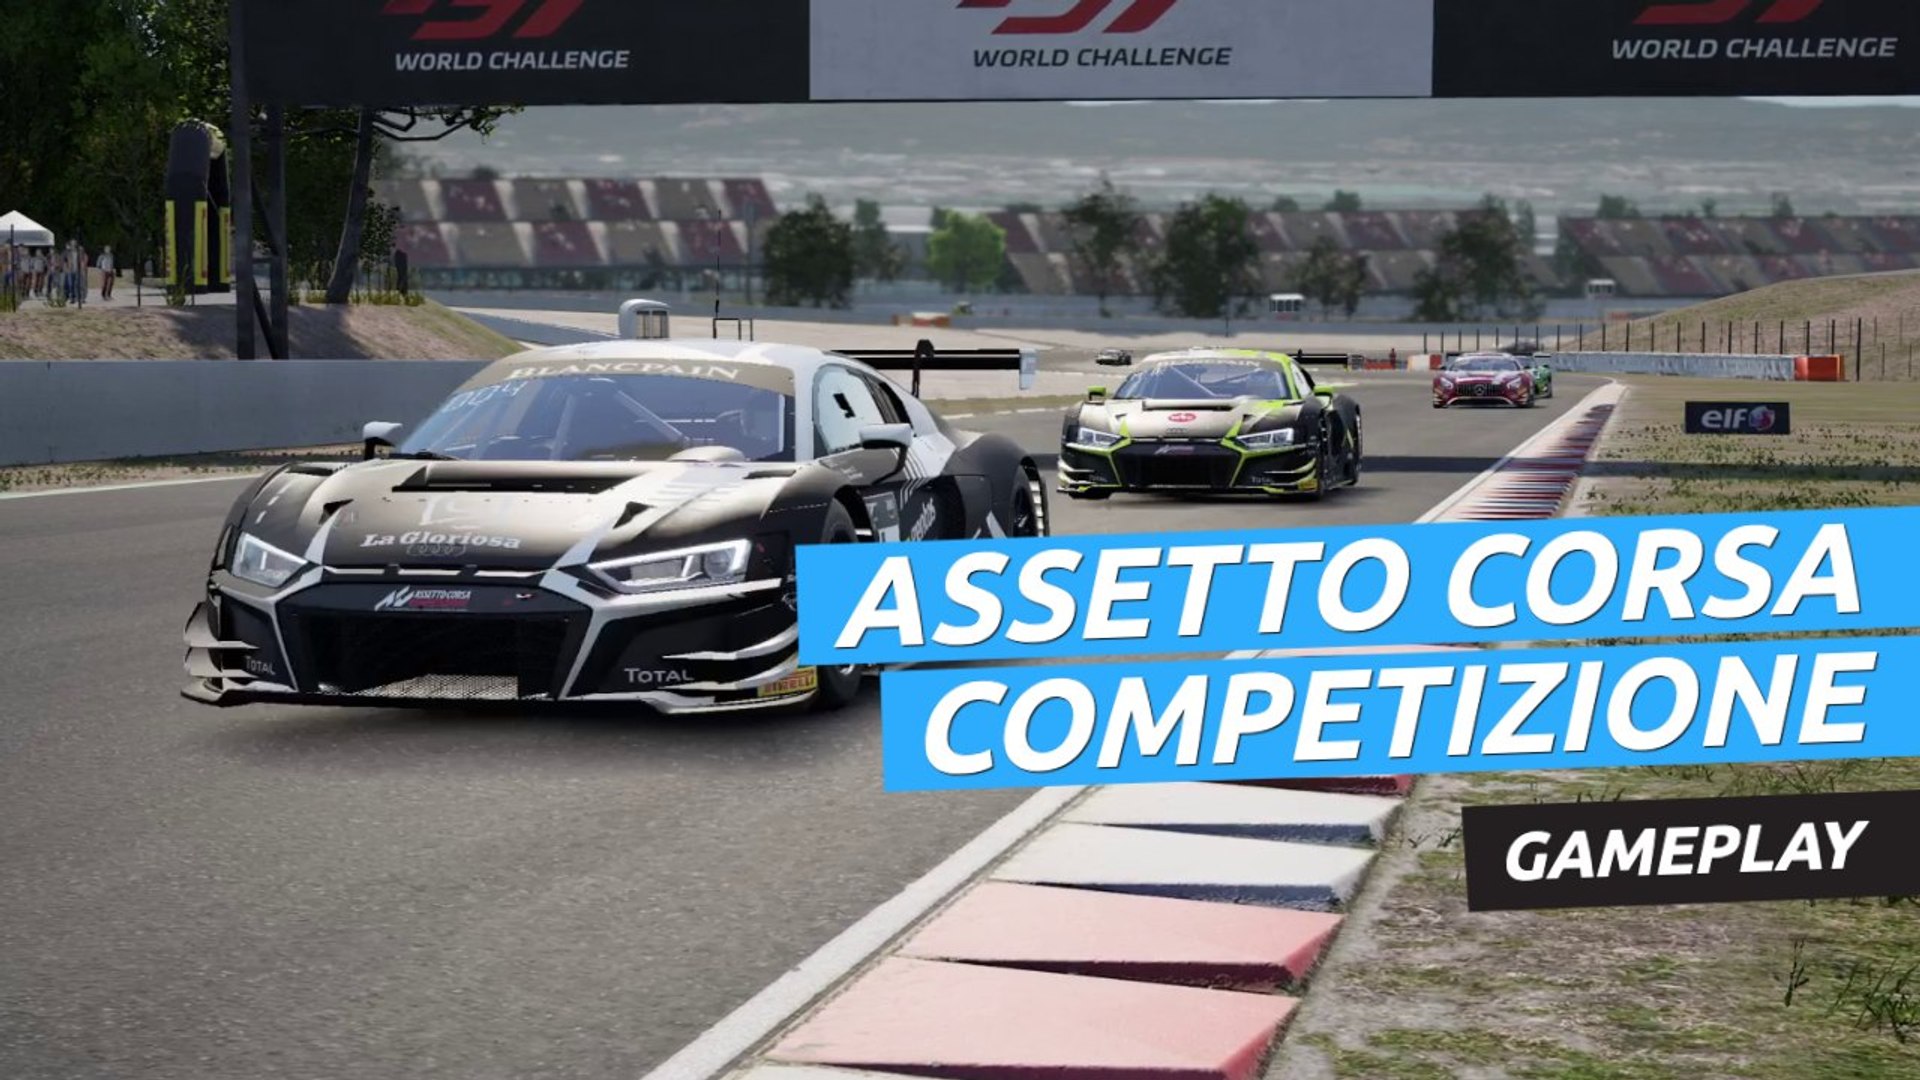 Assetto Corsa Competizione - gameplay de PS4 - Vídeo Dailymotion